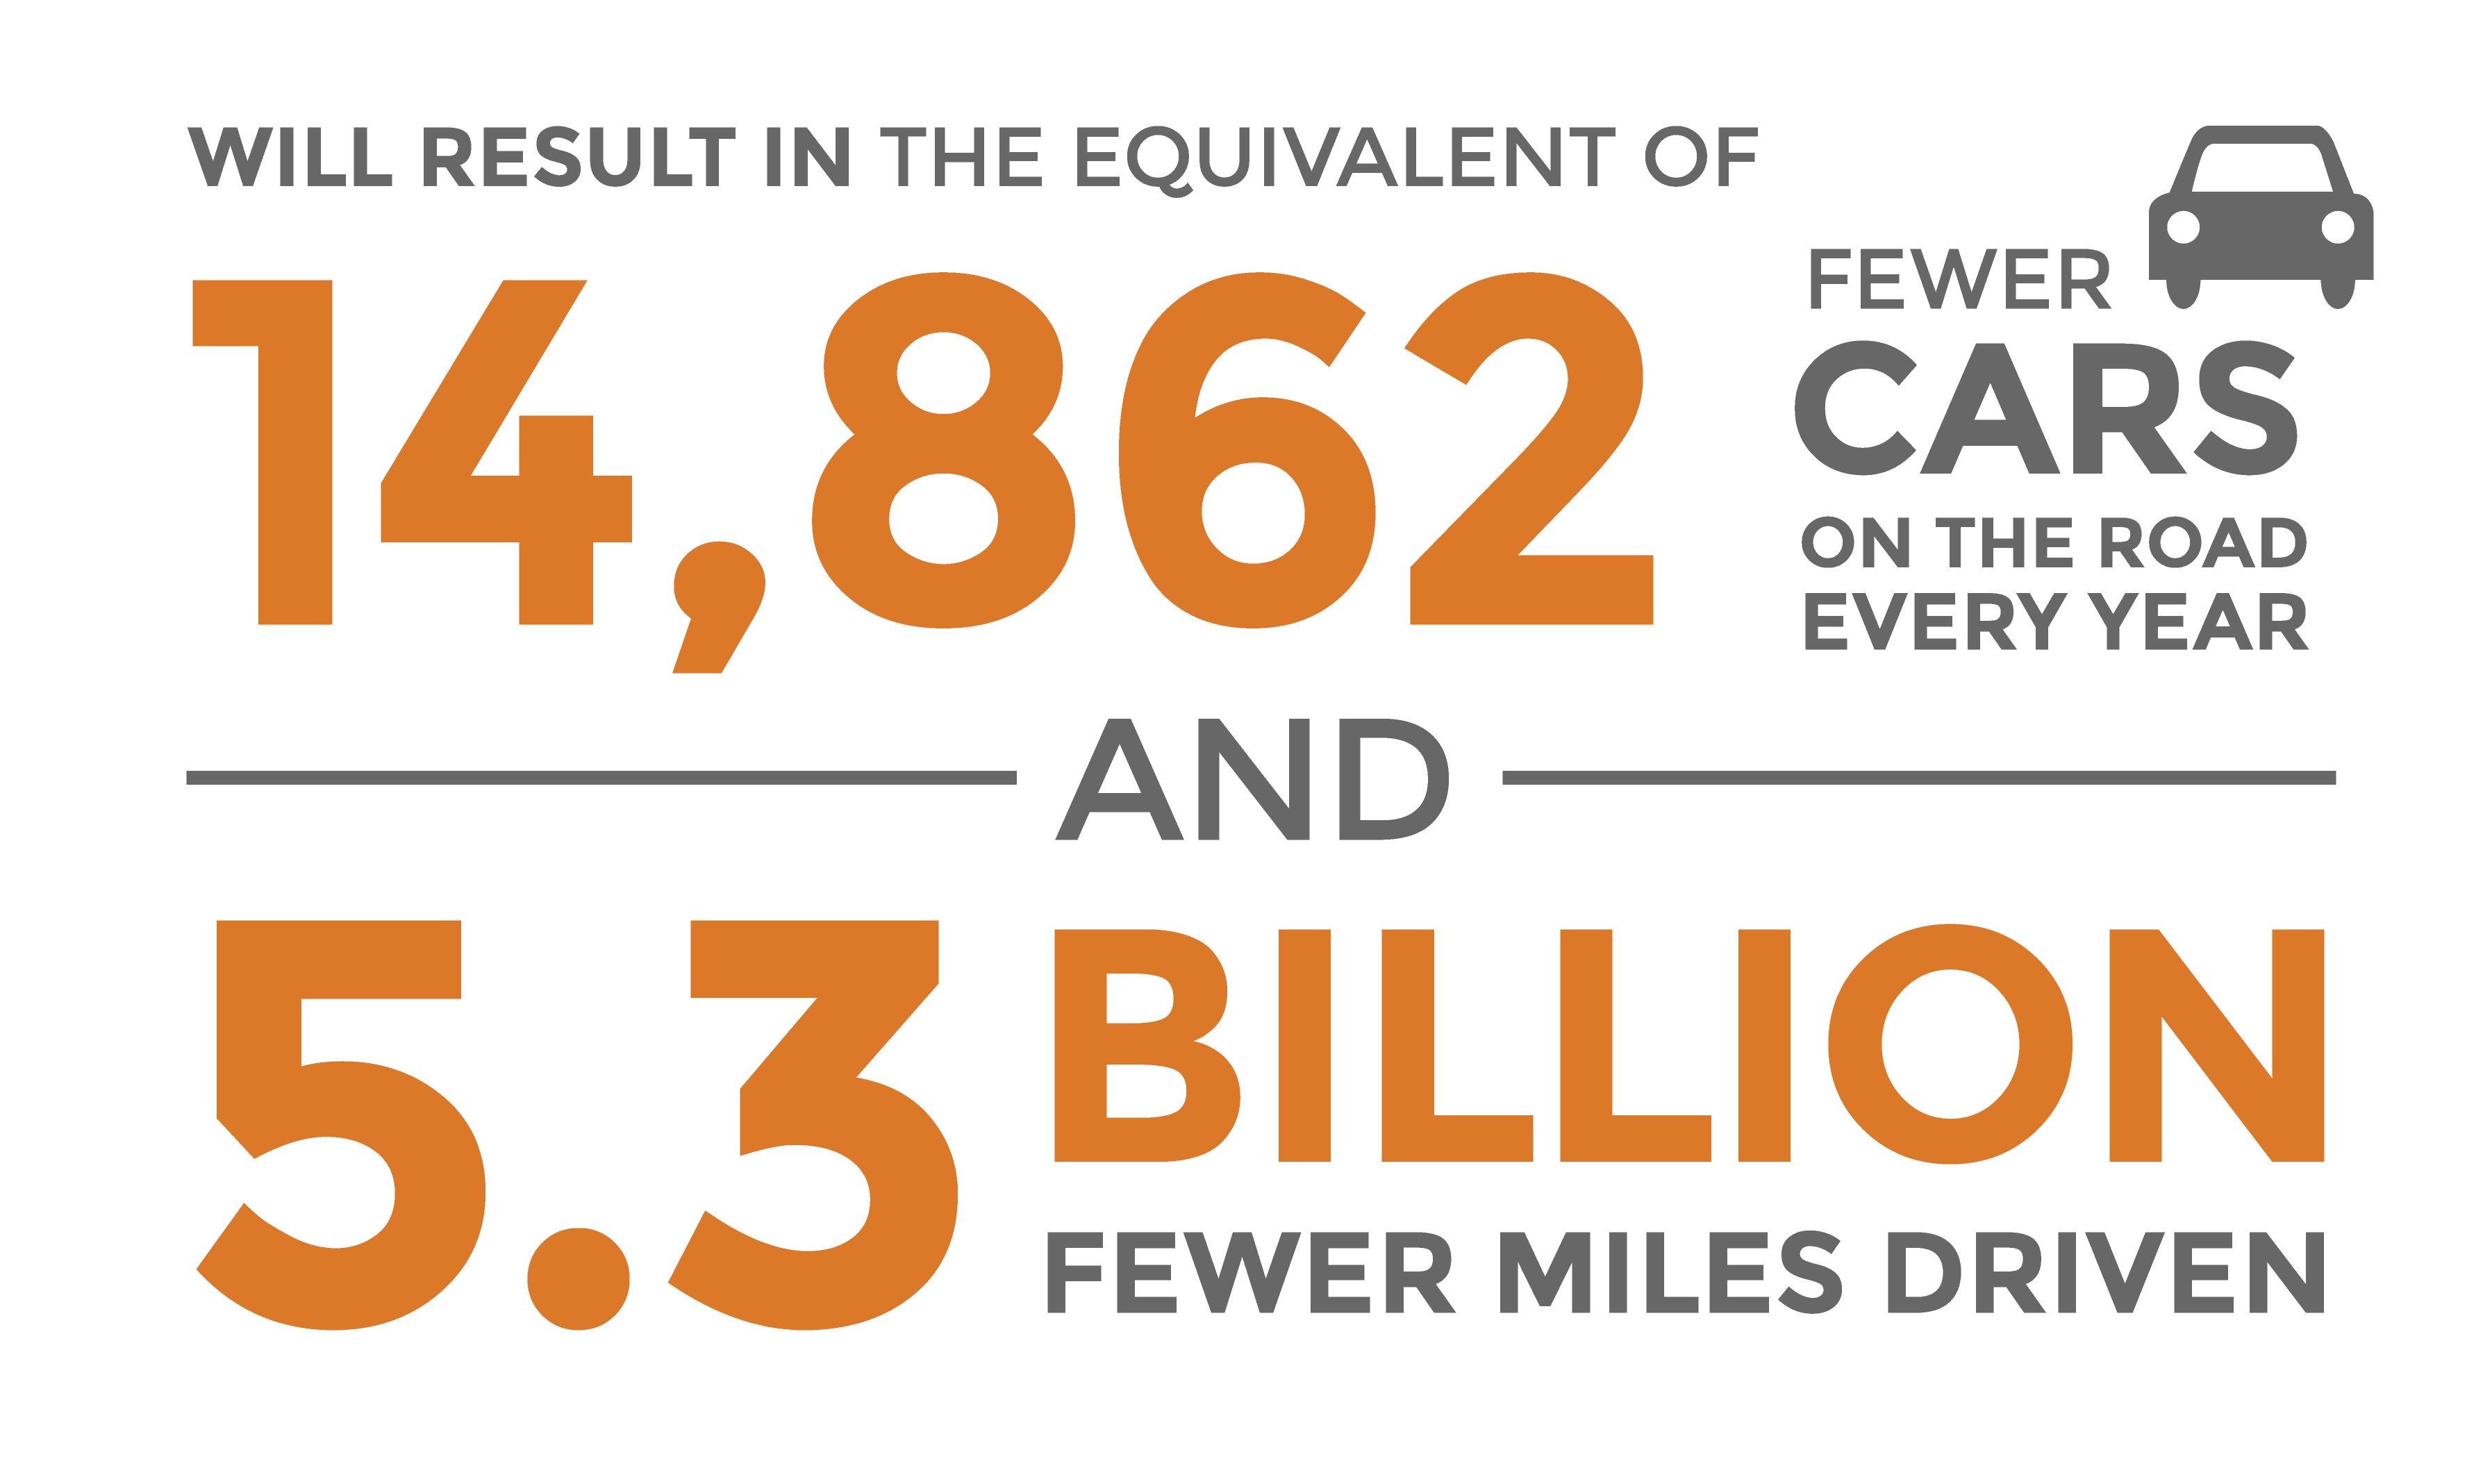 Will result in the equivalent of 14,862 fewer cars on the road every year and 5.3 billion fewer miles driven.